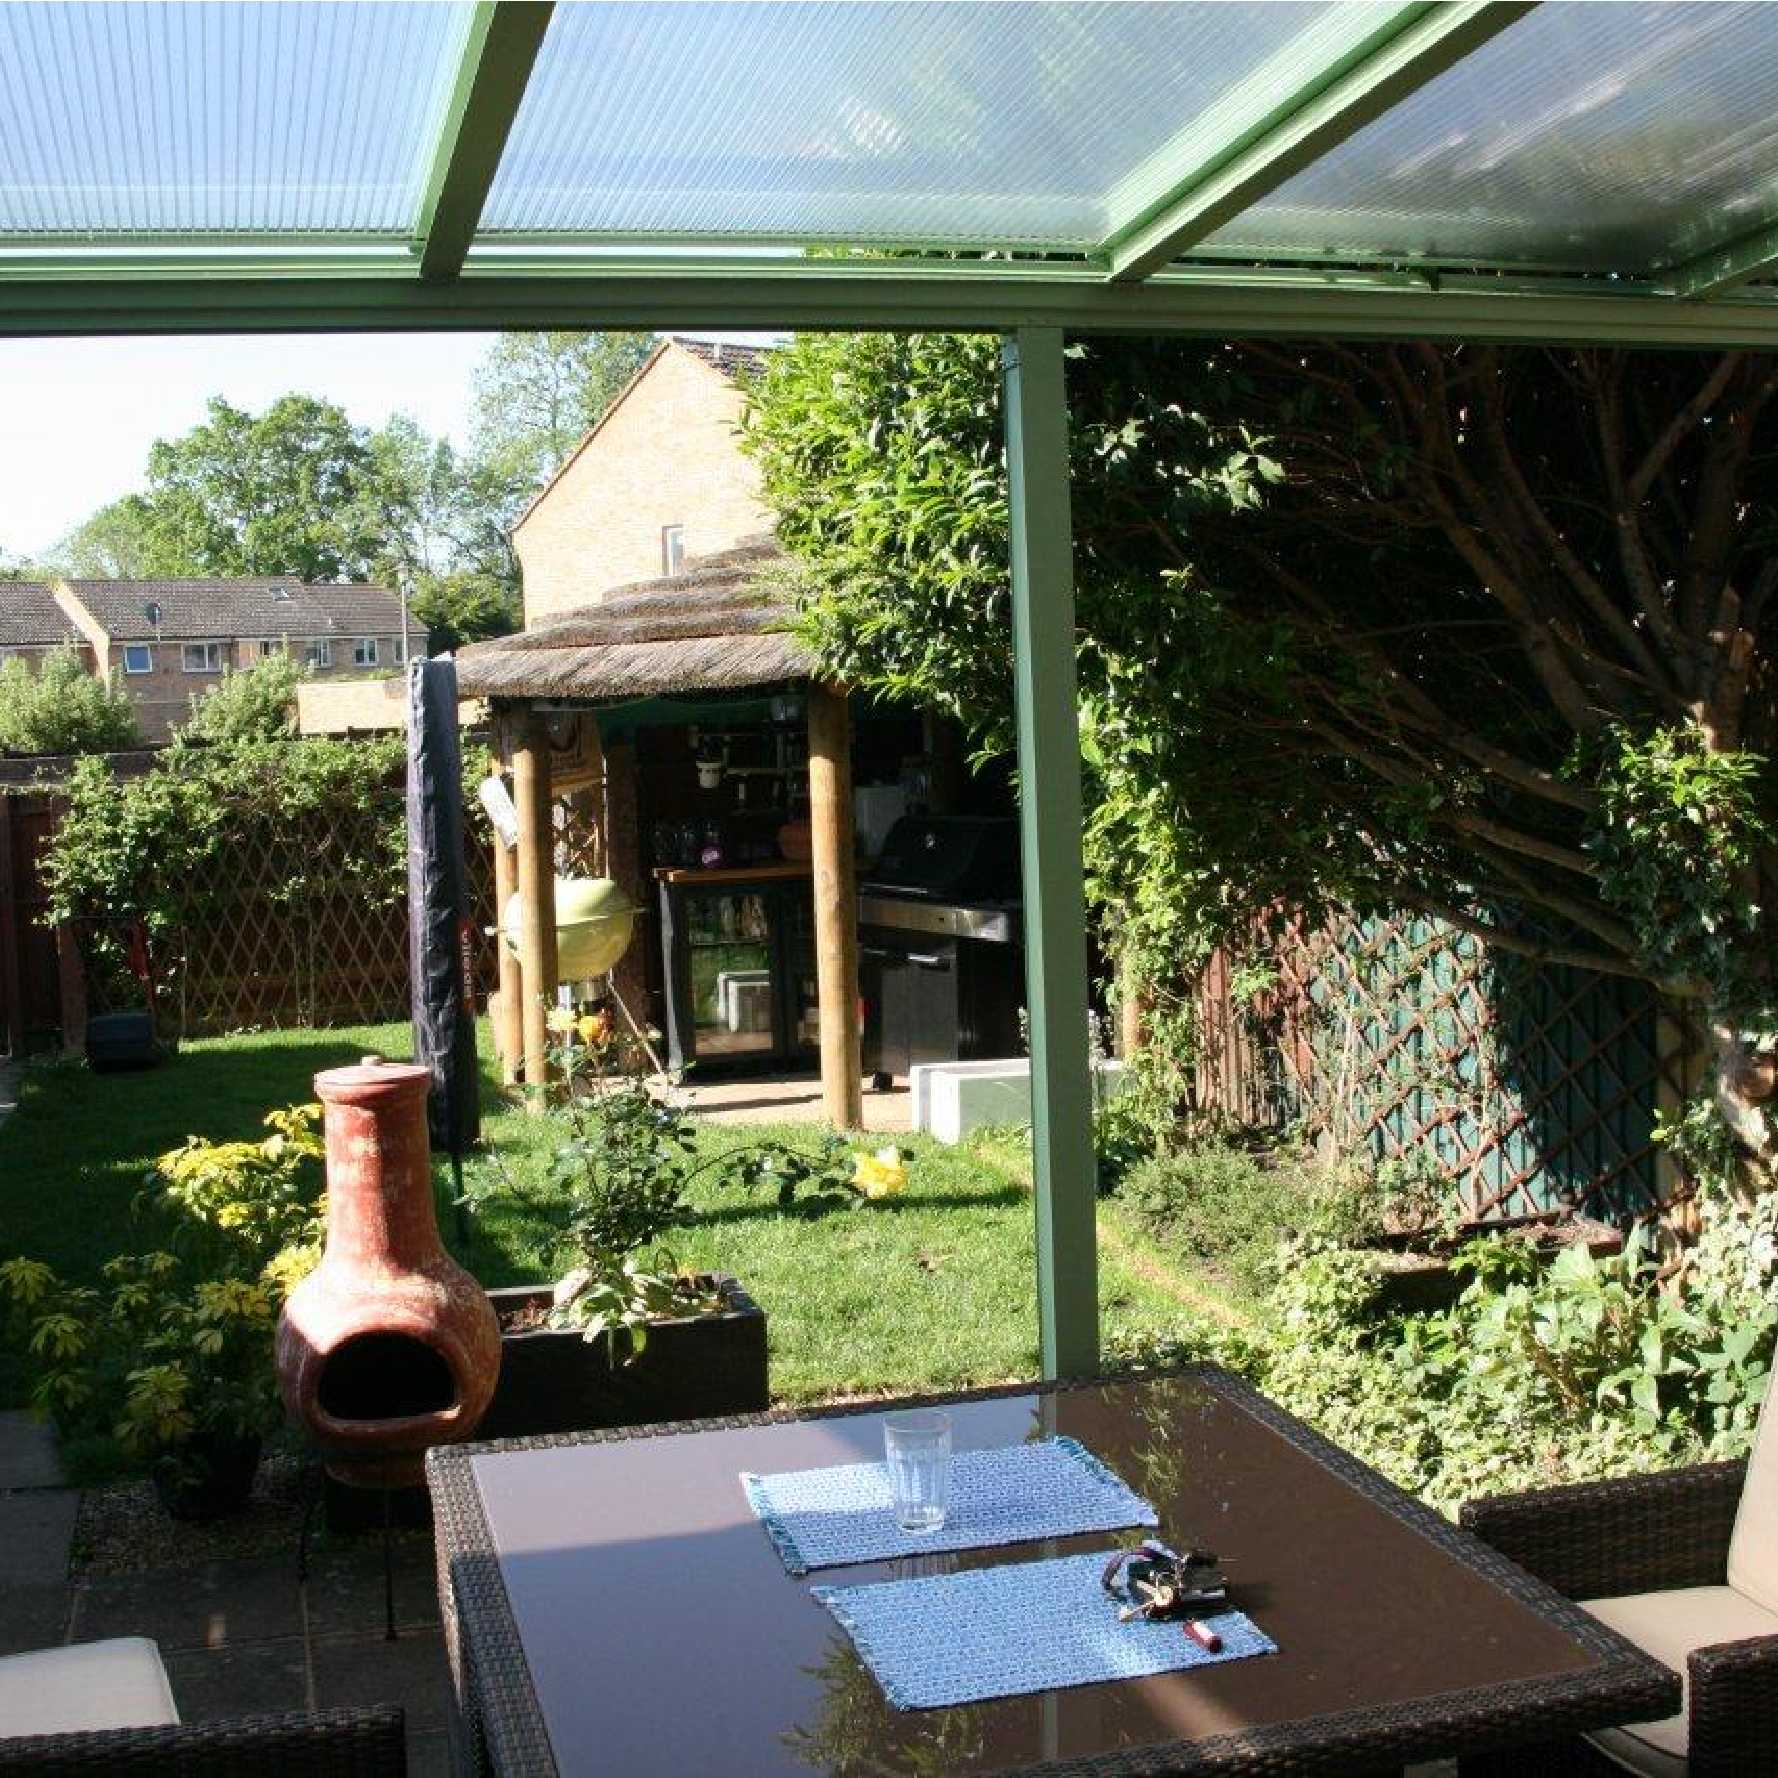 Affordable Omega Smart Lean-To Canopy, White with 16mm Polycarbonate Glazing - 9.9m (W) x 3.5m (P), (5) Supporting Posts